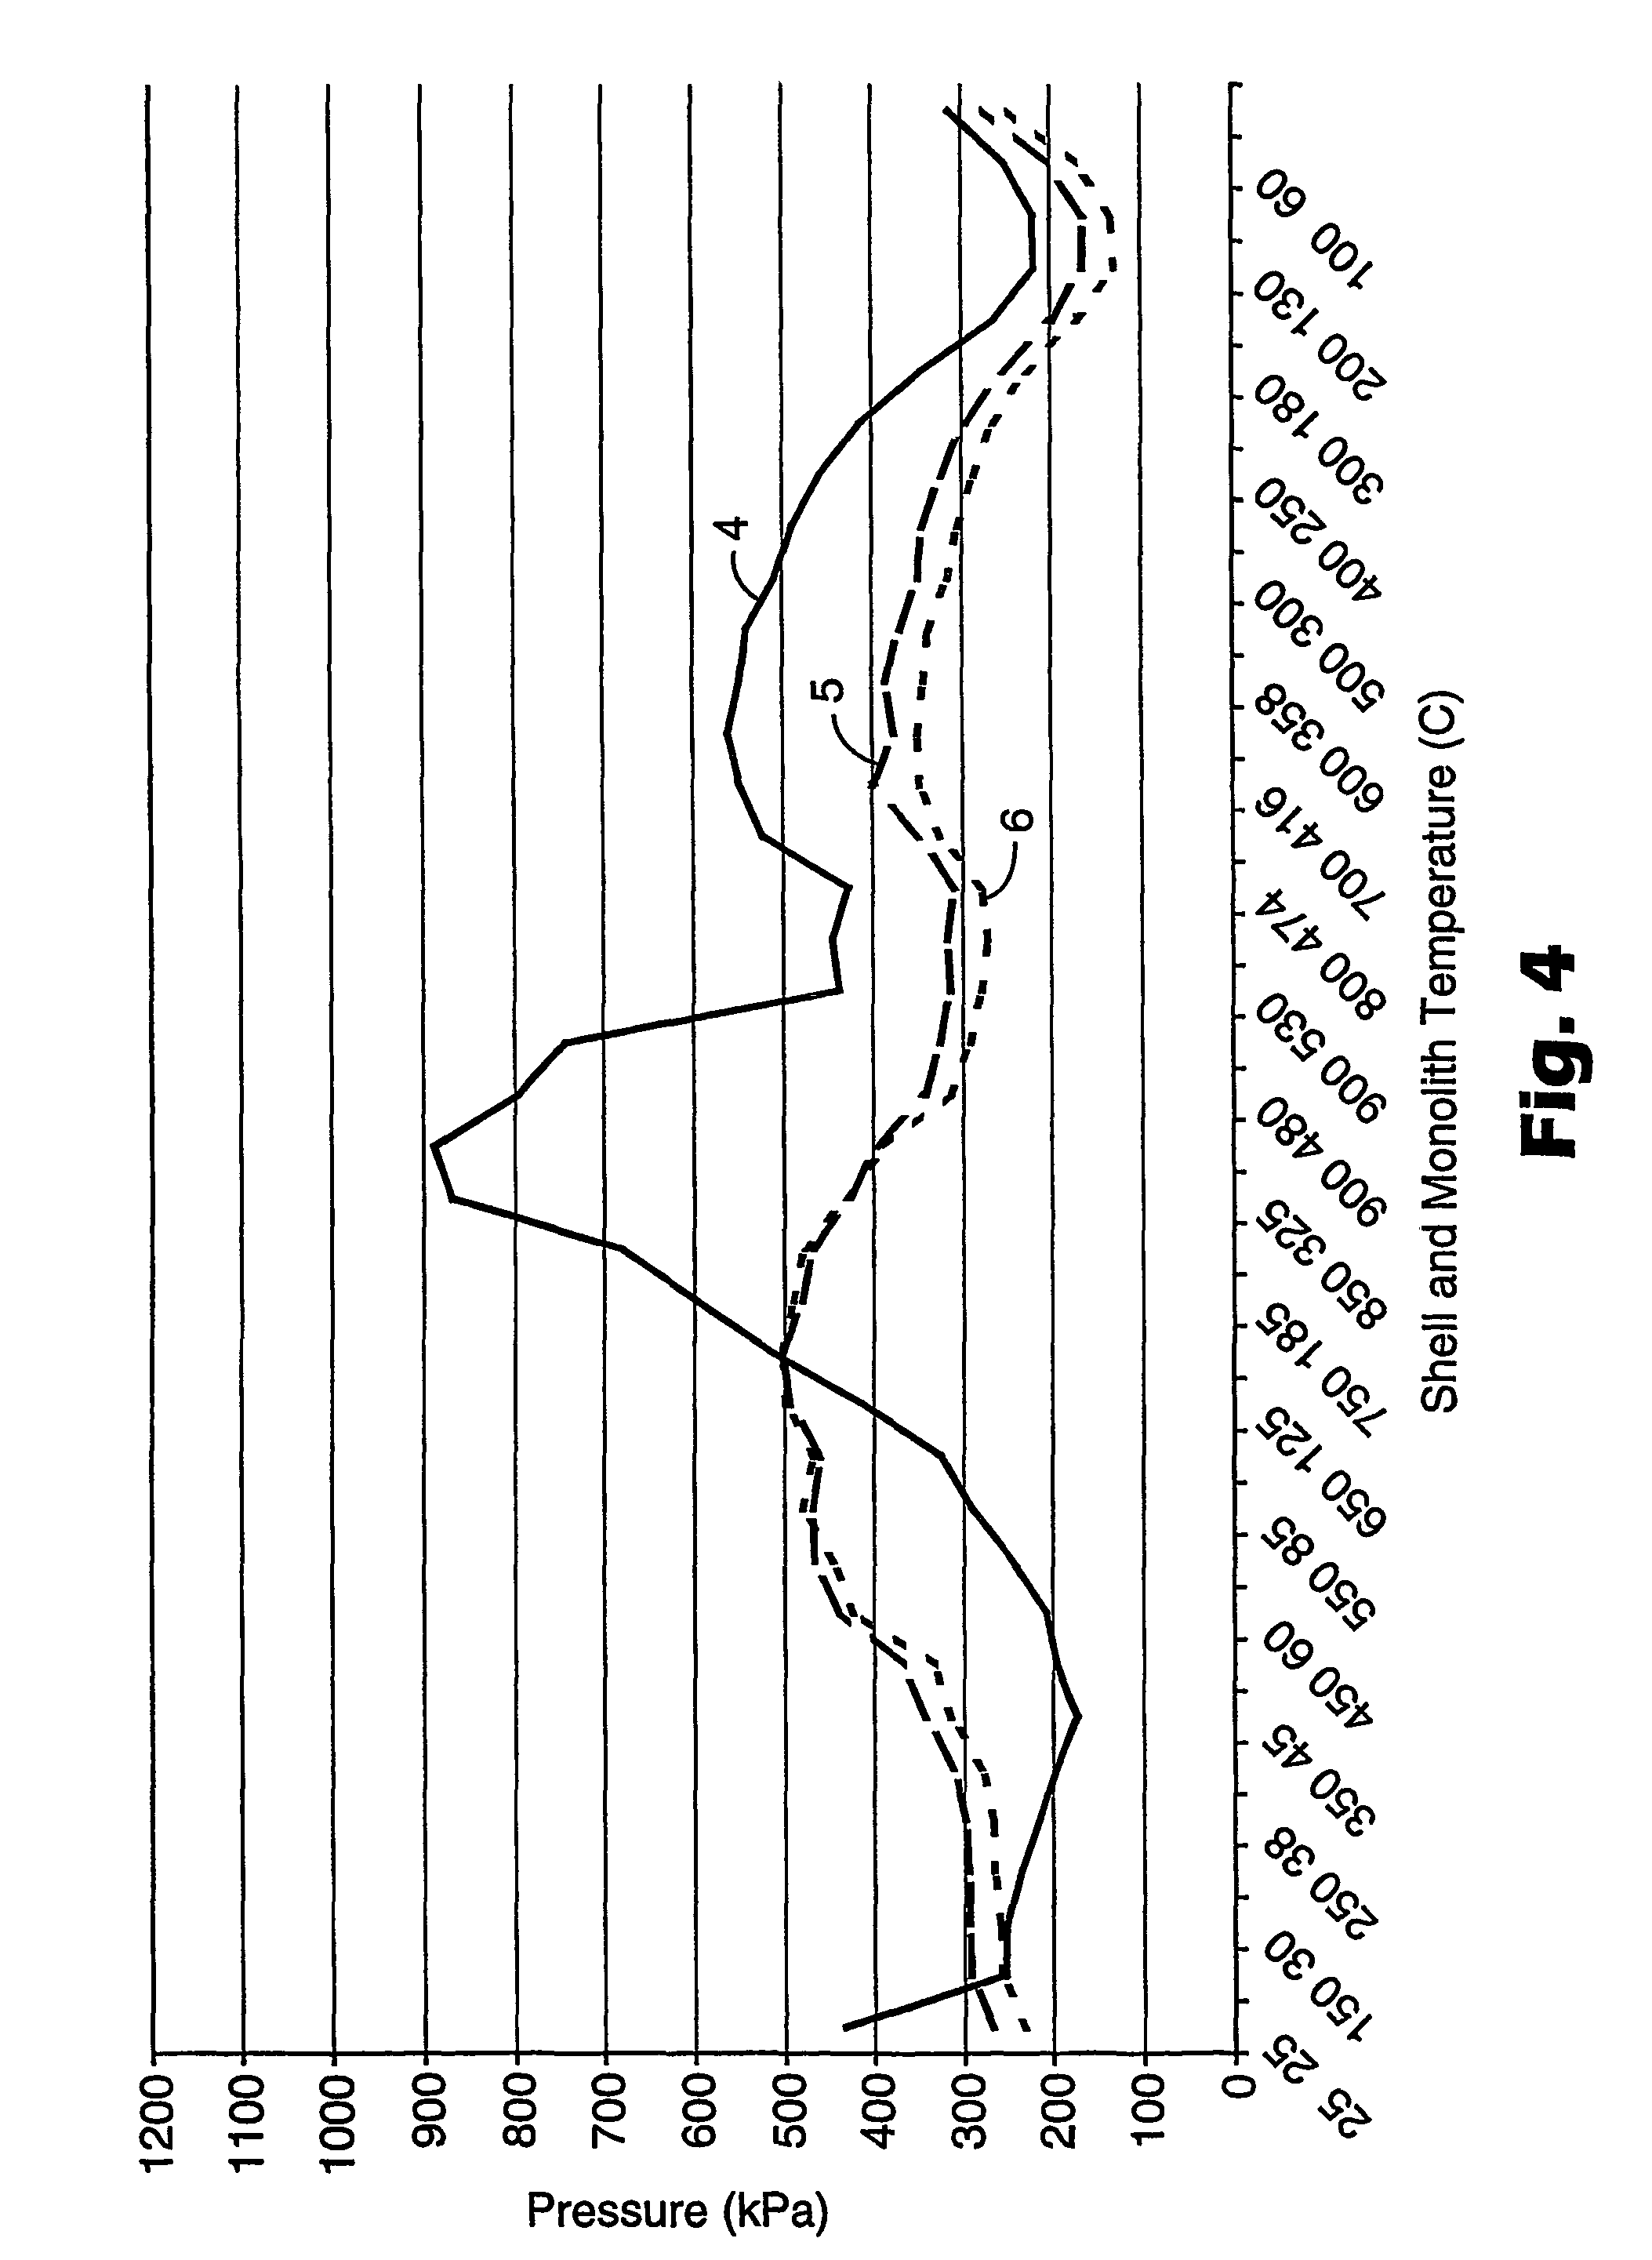 Compositions containing biosoluble inorganic fibers and micaceous binders